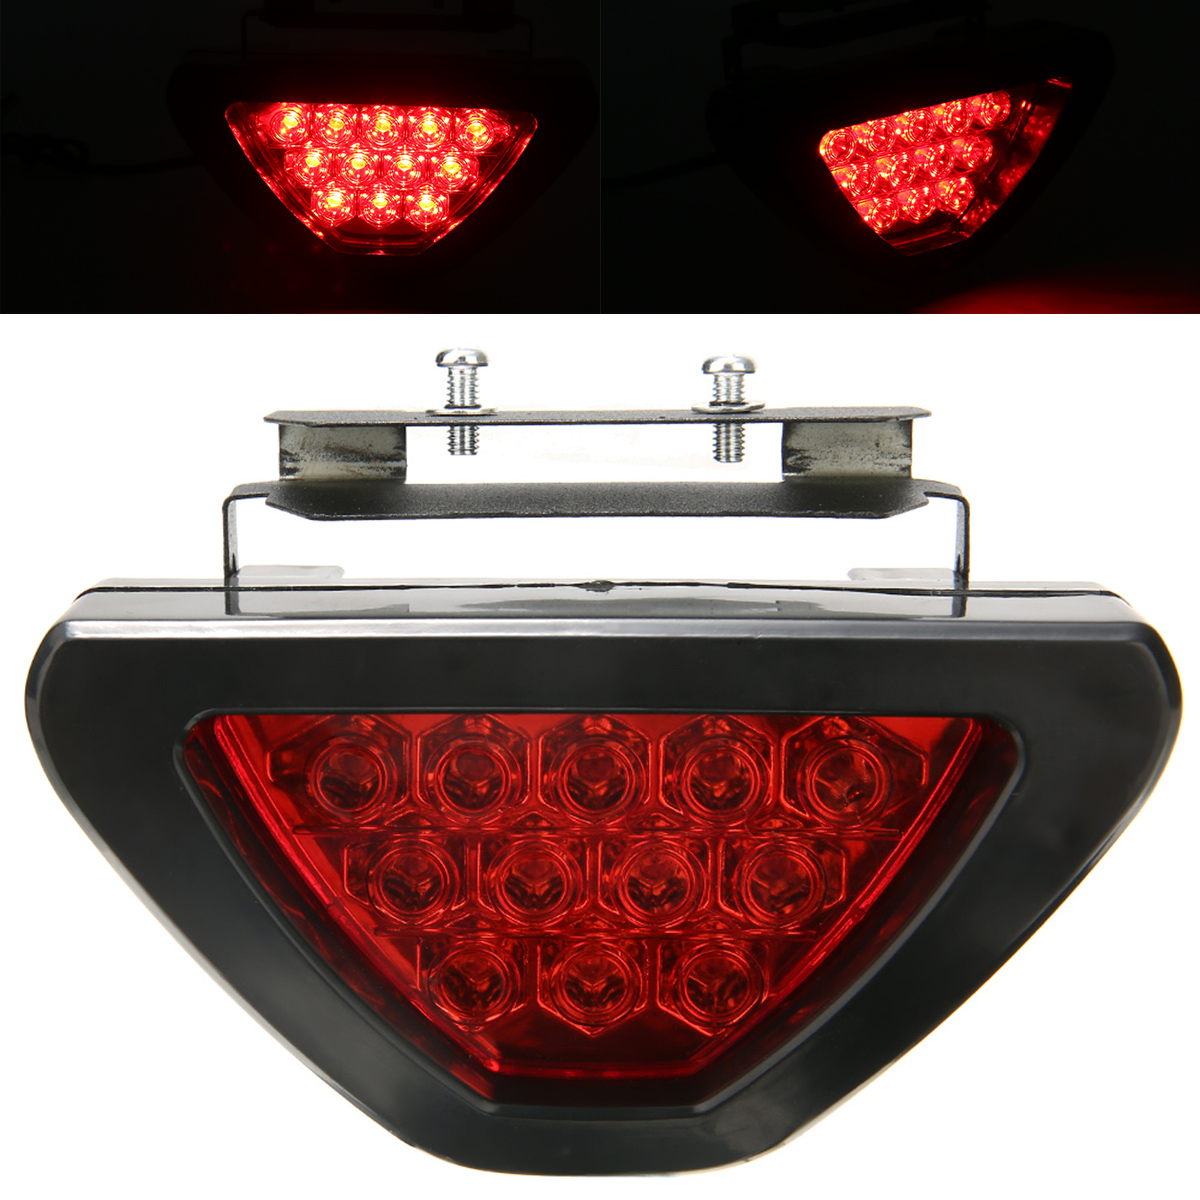 New Arrival 1pc Brake Lights Universal F1 Style 12 LED Red Rear Tail Third Brake Stop Safety Lamp Light Car LED Signal Lamp